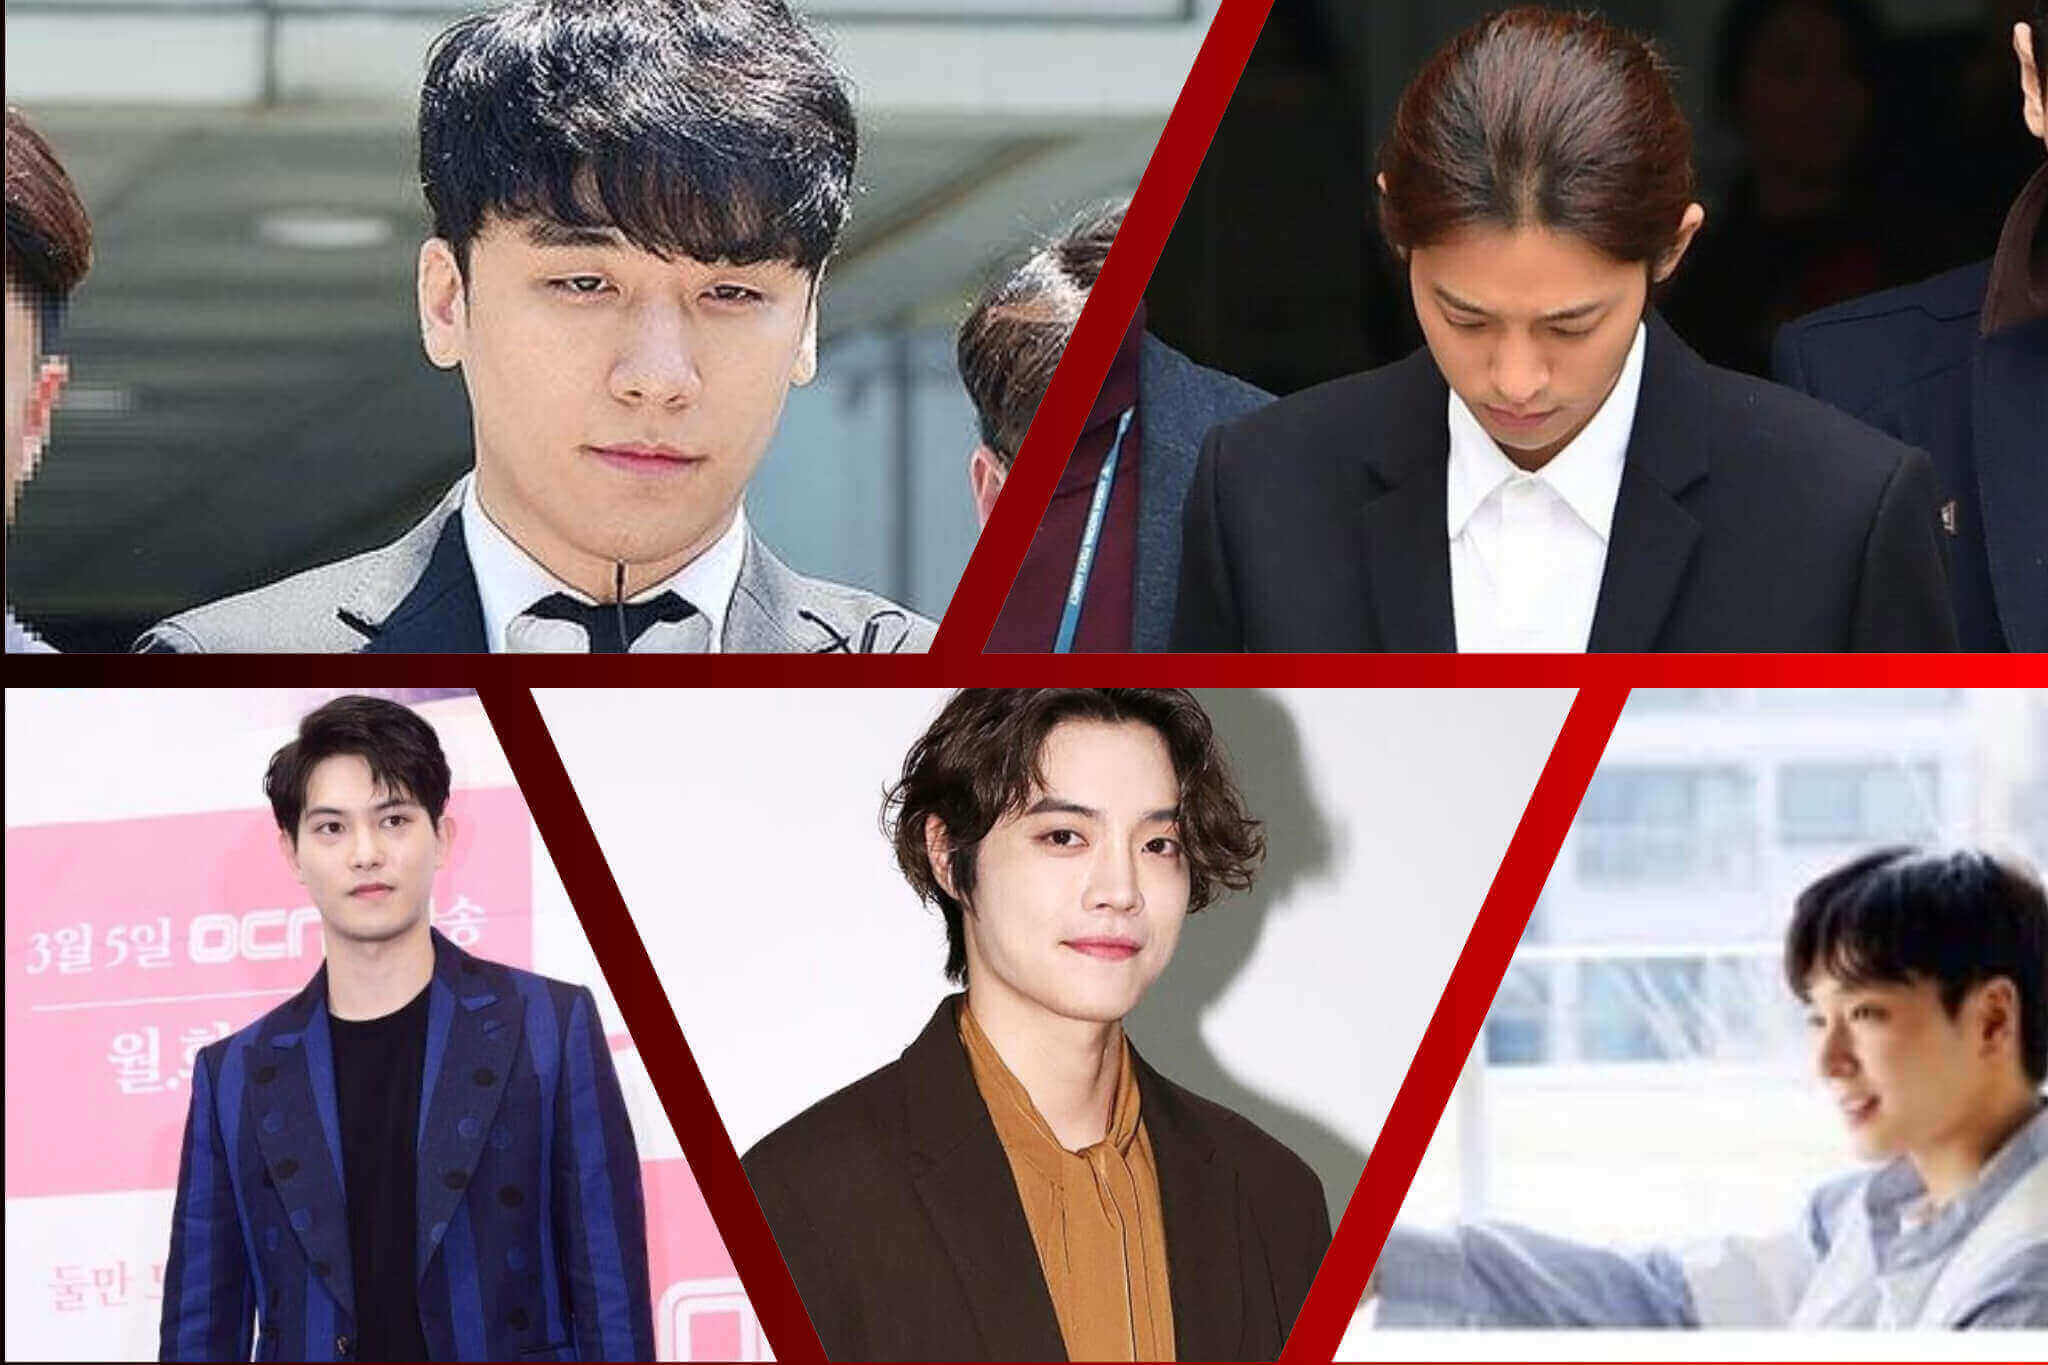 Resurgence Unveiled: The 5 Majority of Idols Embroiled in the Burning Sun Scandal Return to the Spotlight!